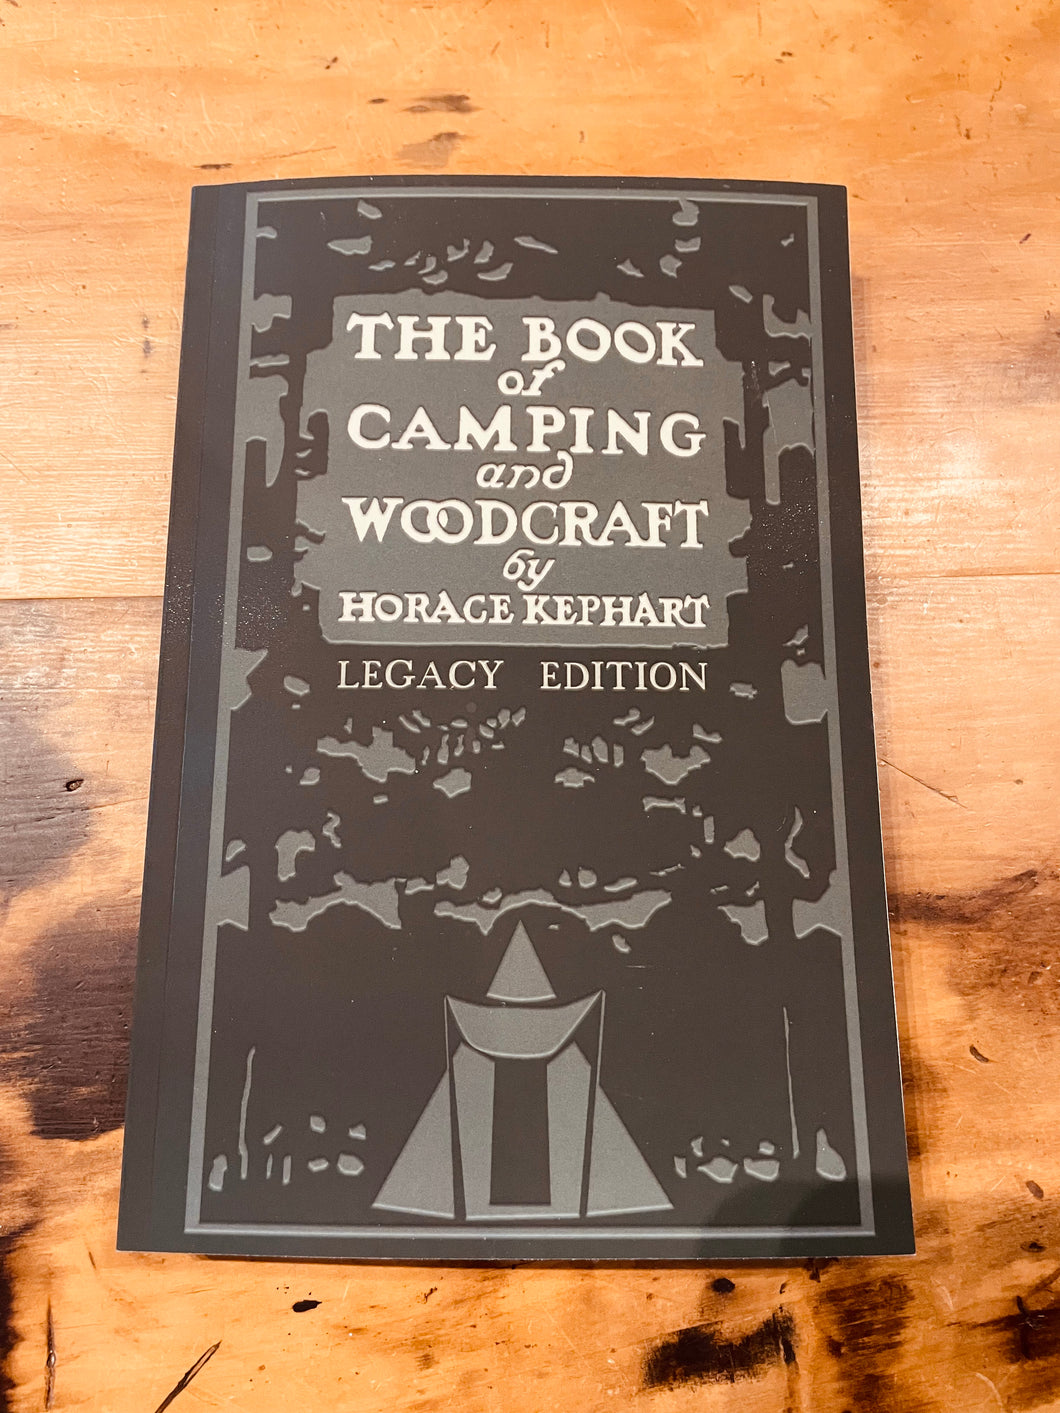 The book of Camping and Woodcraft